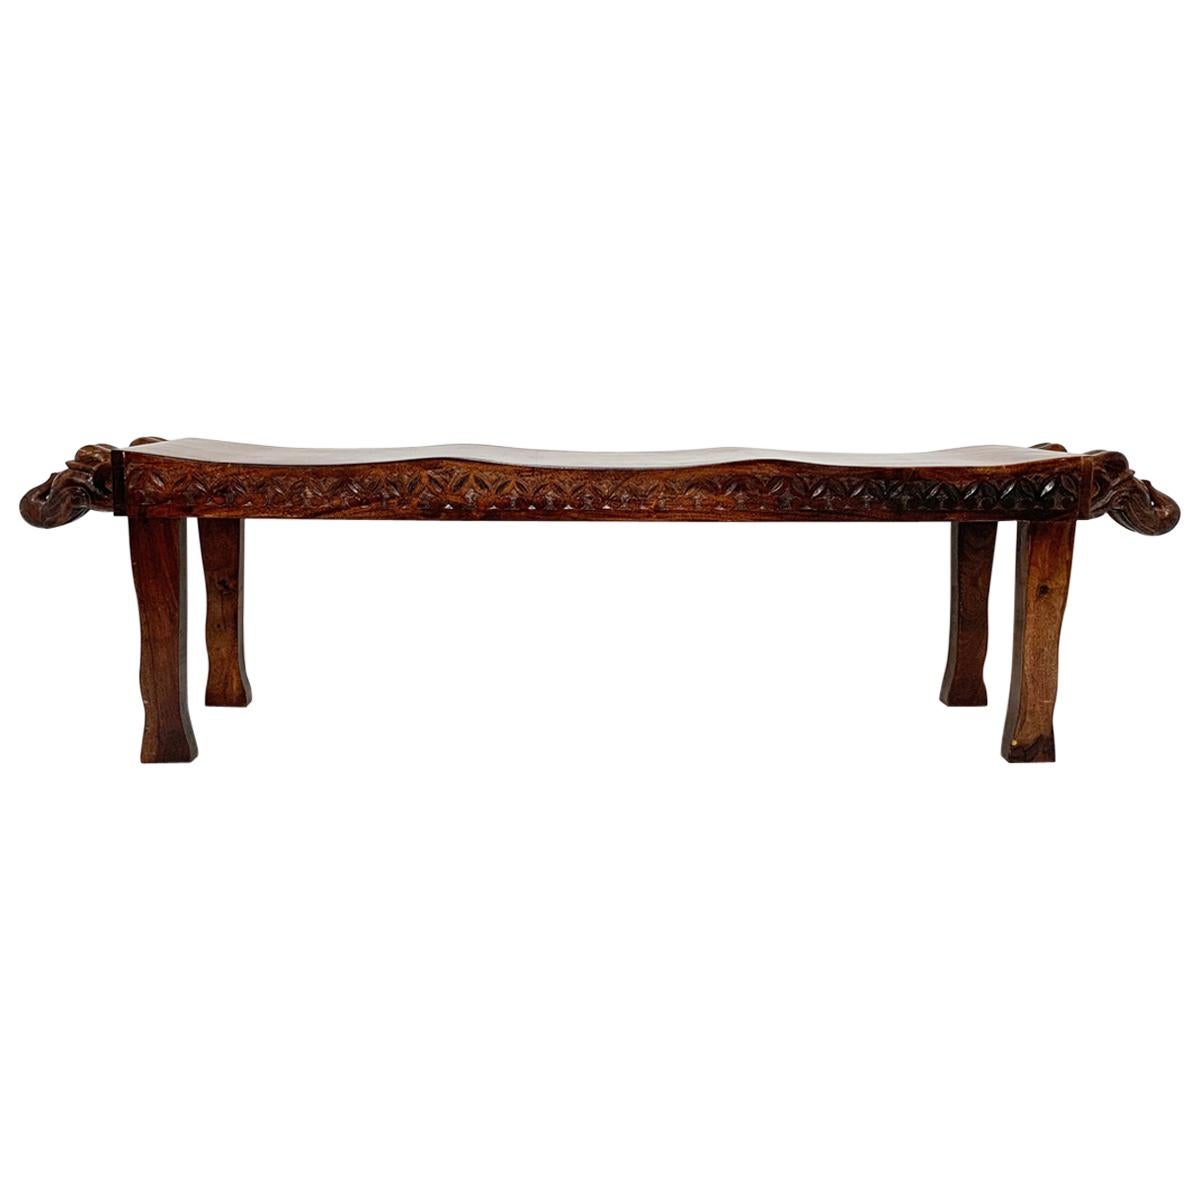 Anglo-Indian Three-Seat Bench with Decorative Elephant Head Carvings circa 1970s